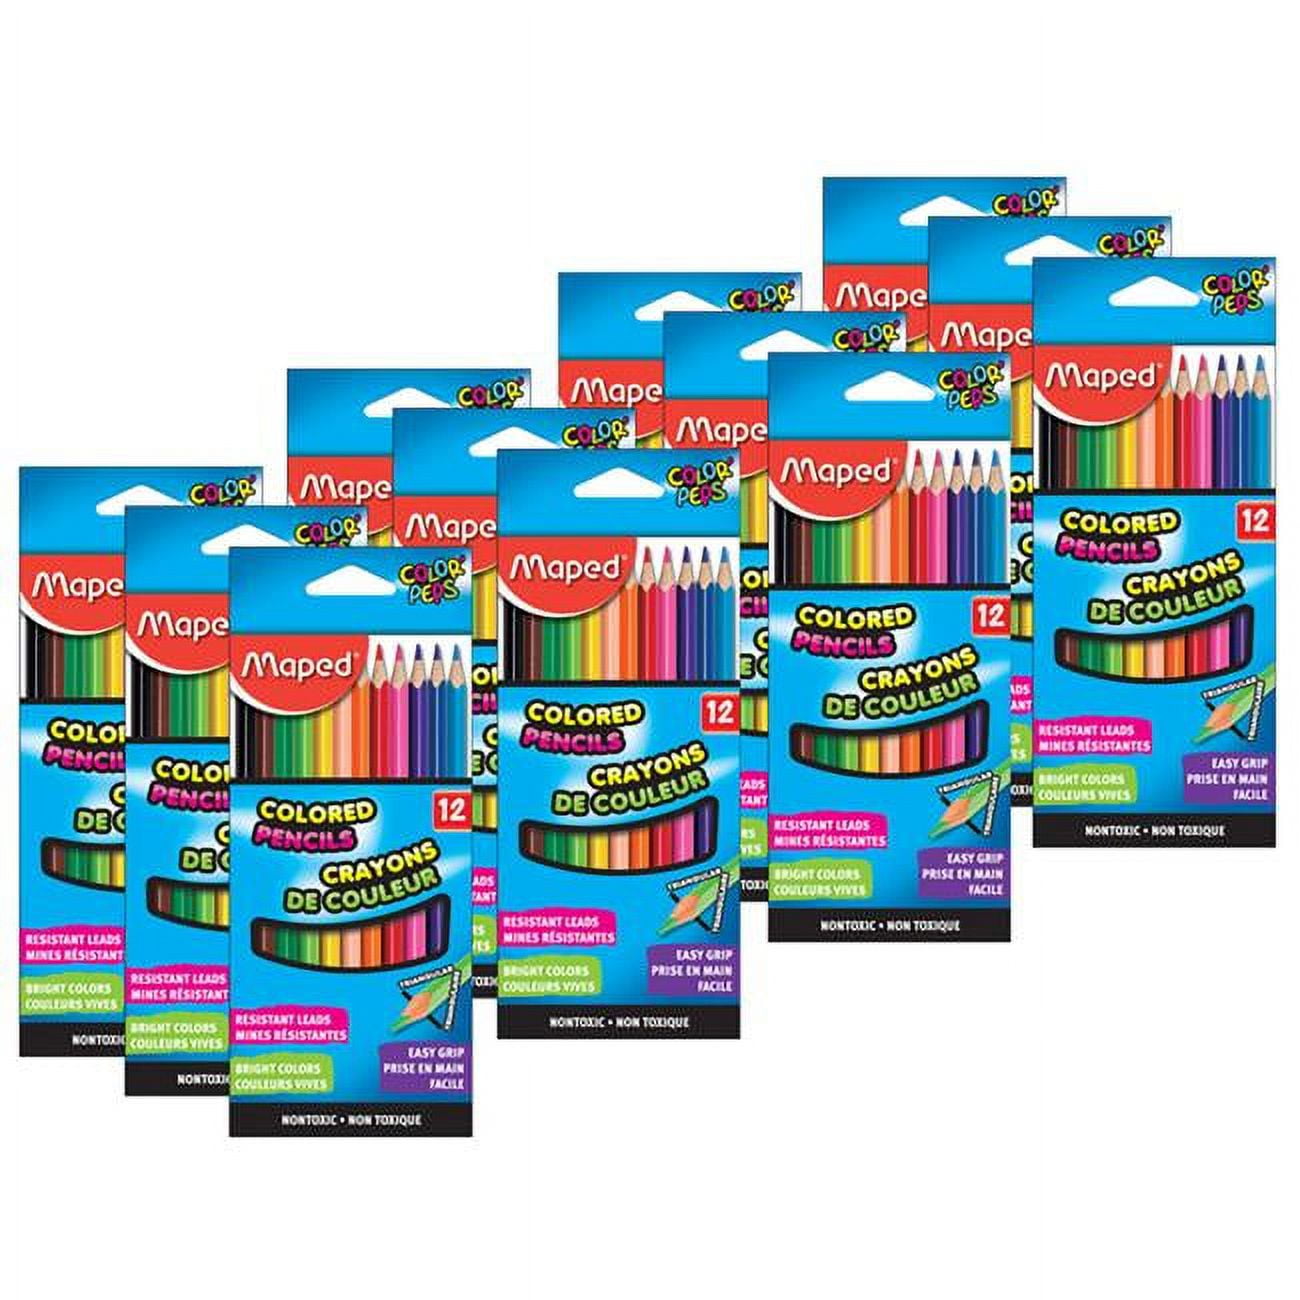 Maped Triangular Colored Pencils (144 Count) 